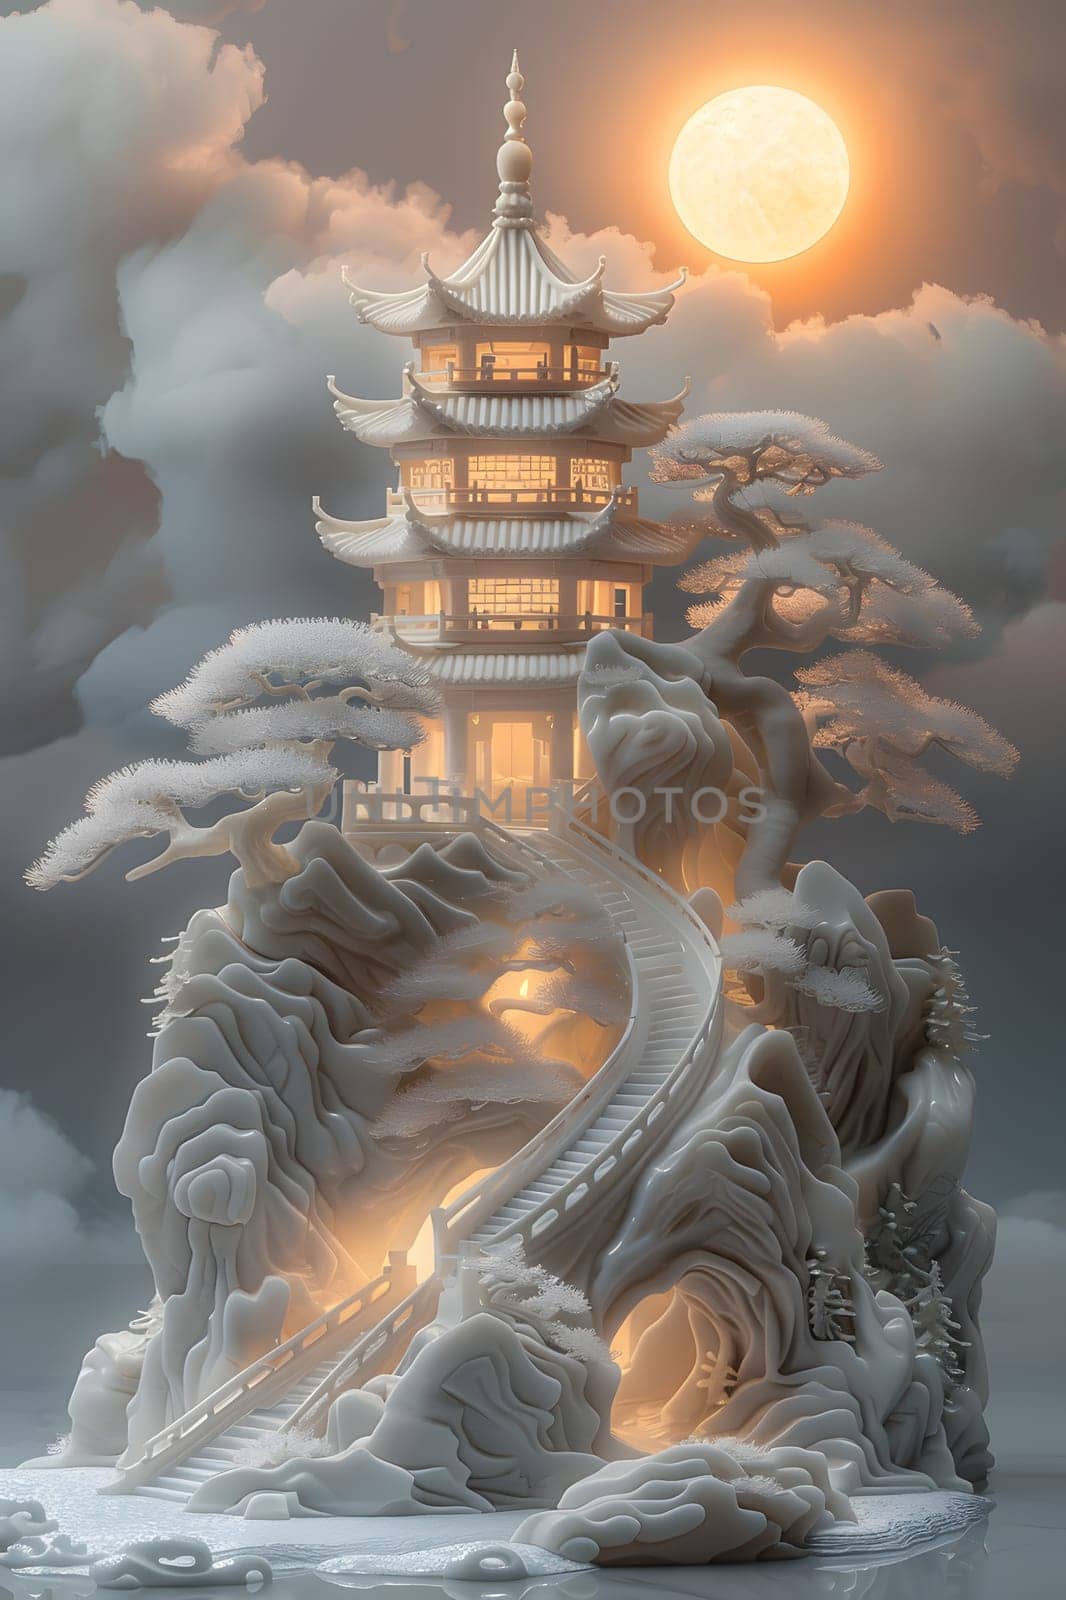 A mythical pagoda sculpture atop a snowcovered mountain under a cloudy sky by Nadtochiy